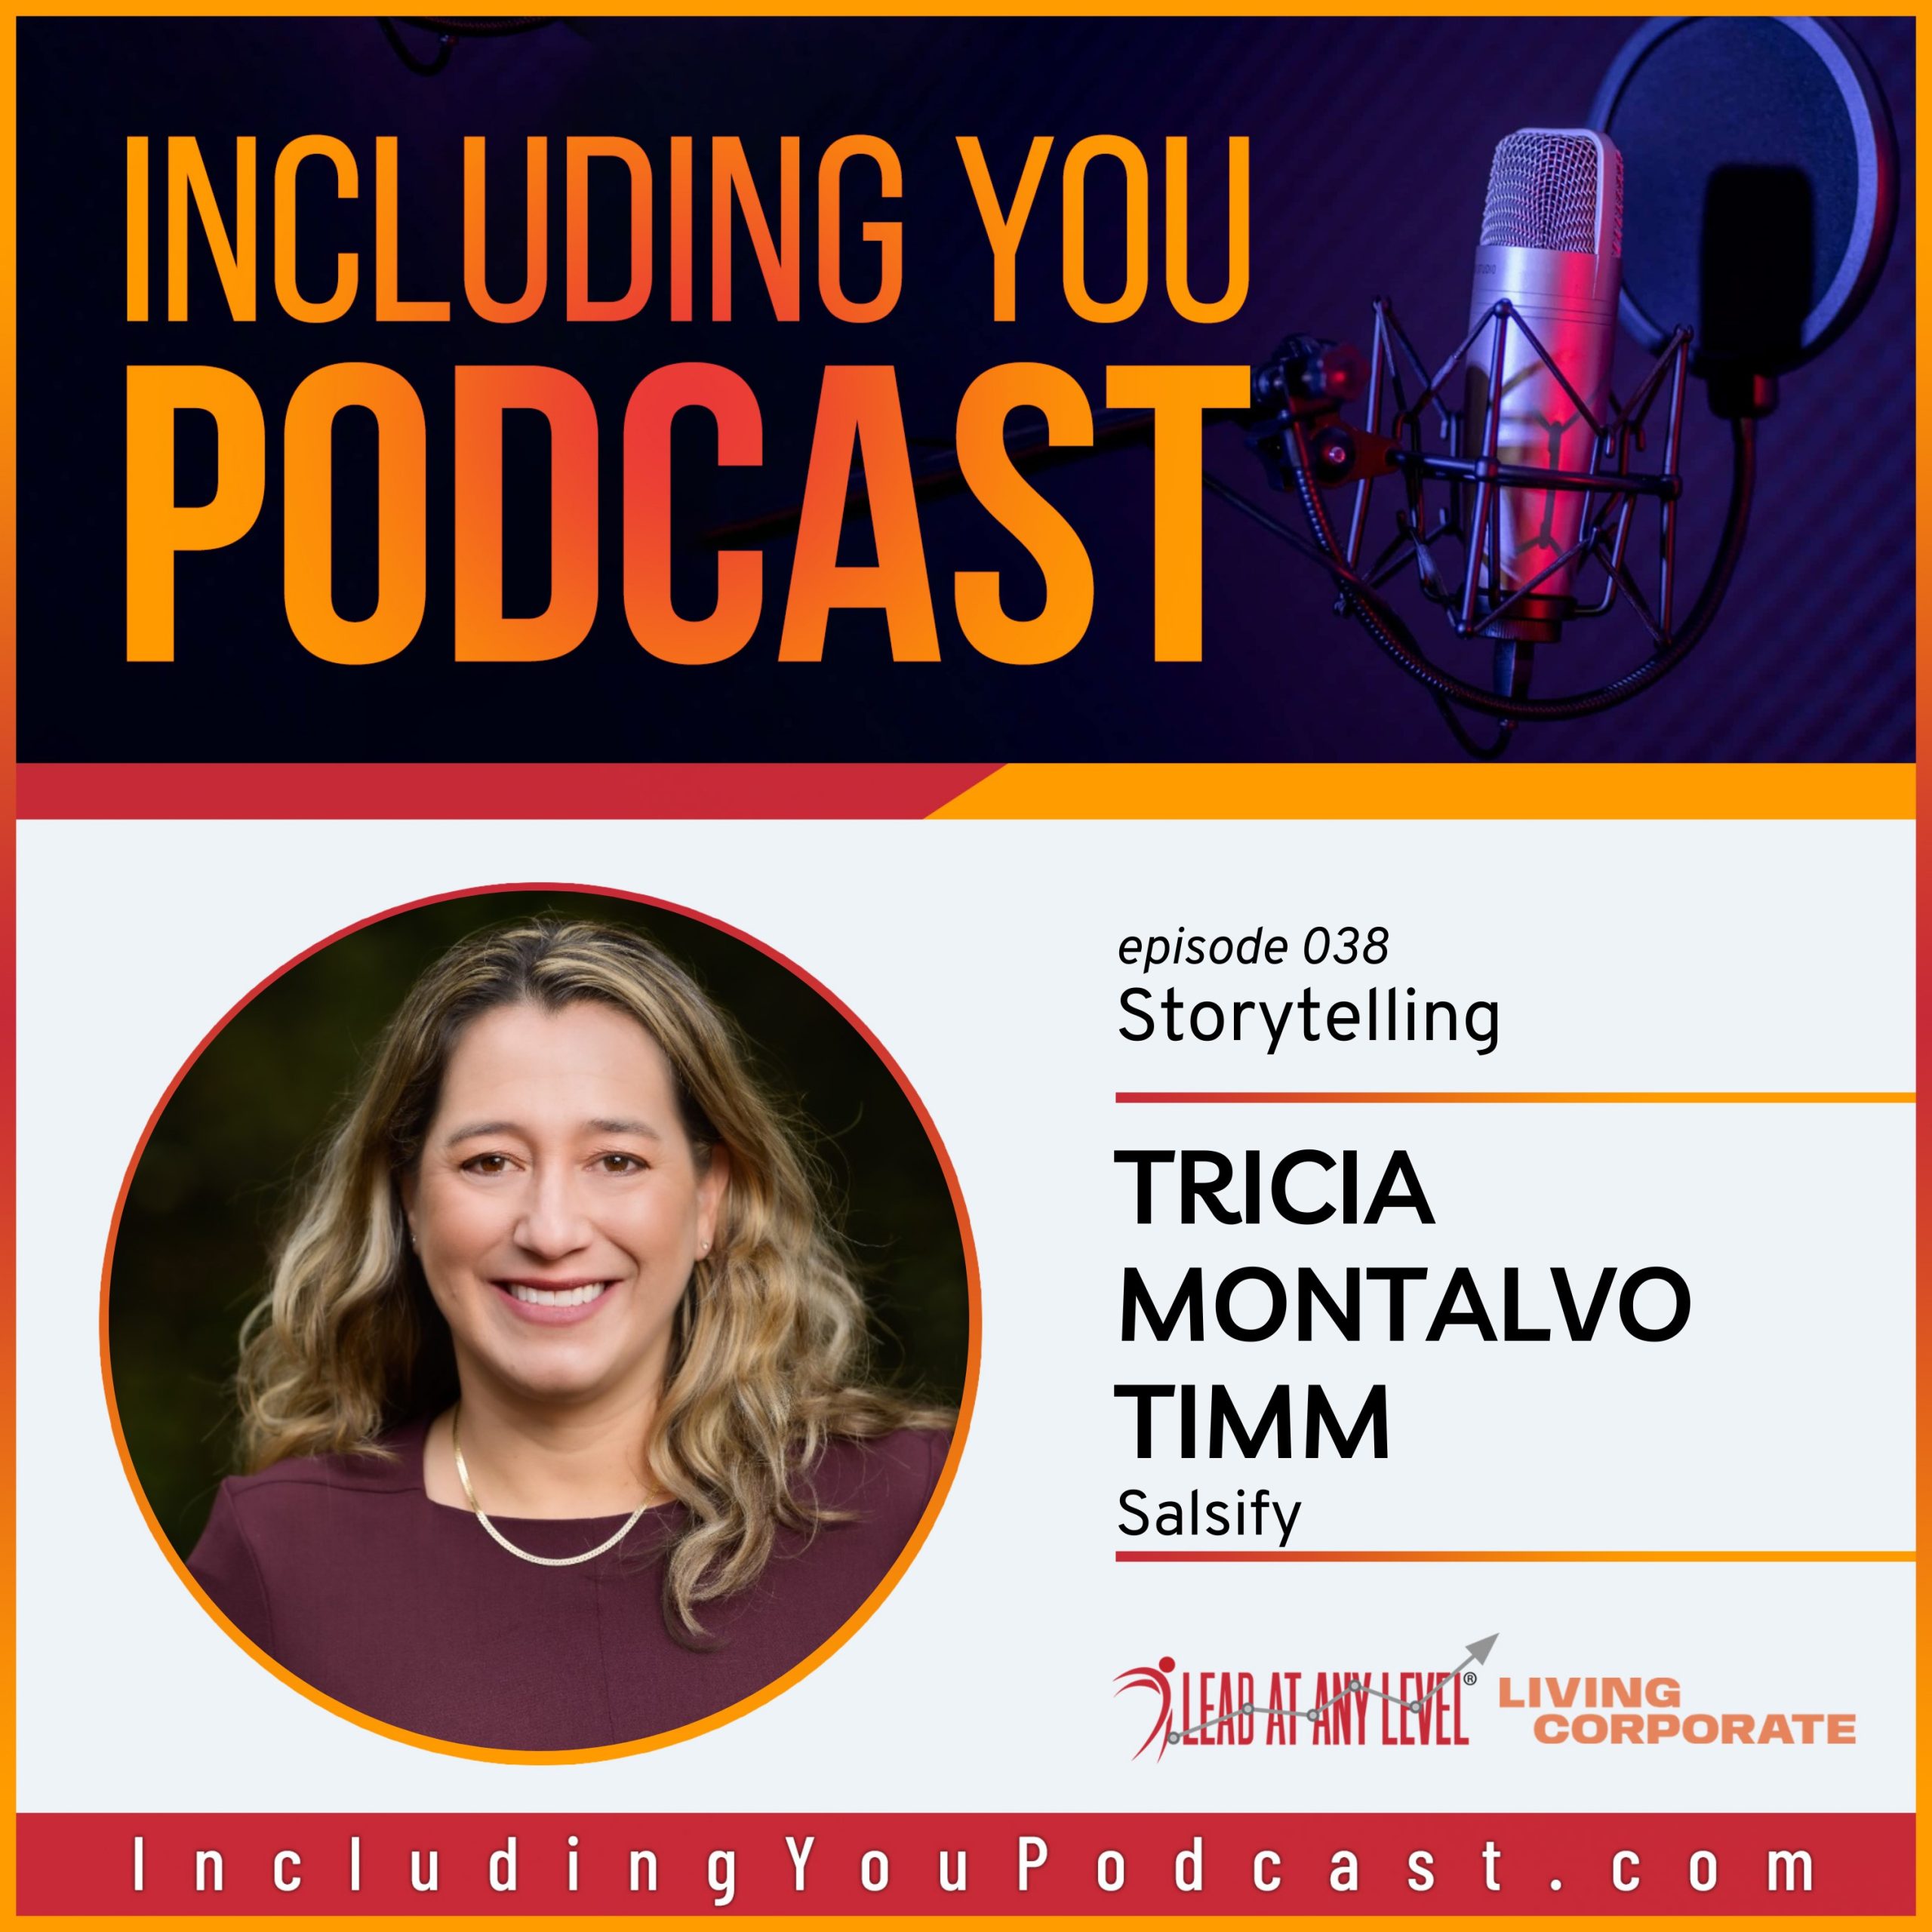 e038. Storytelling with Tricia Montalvo Timm